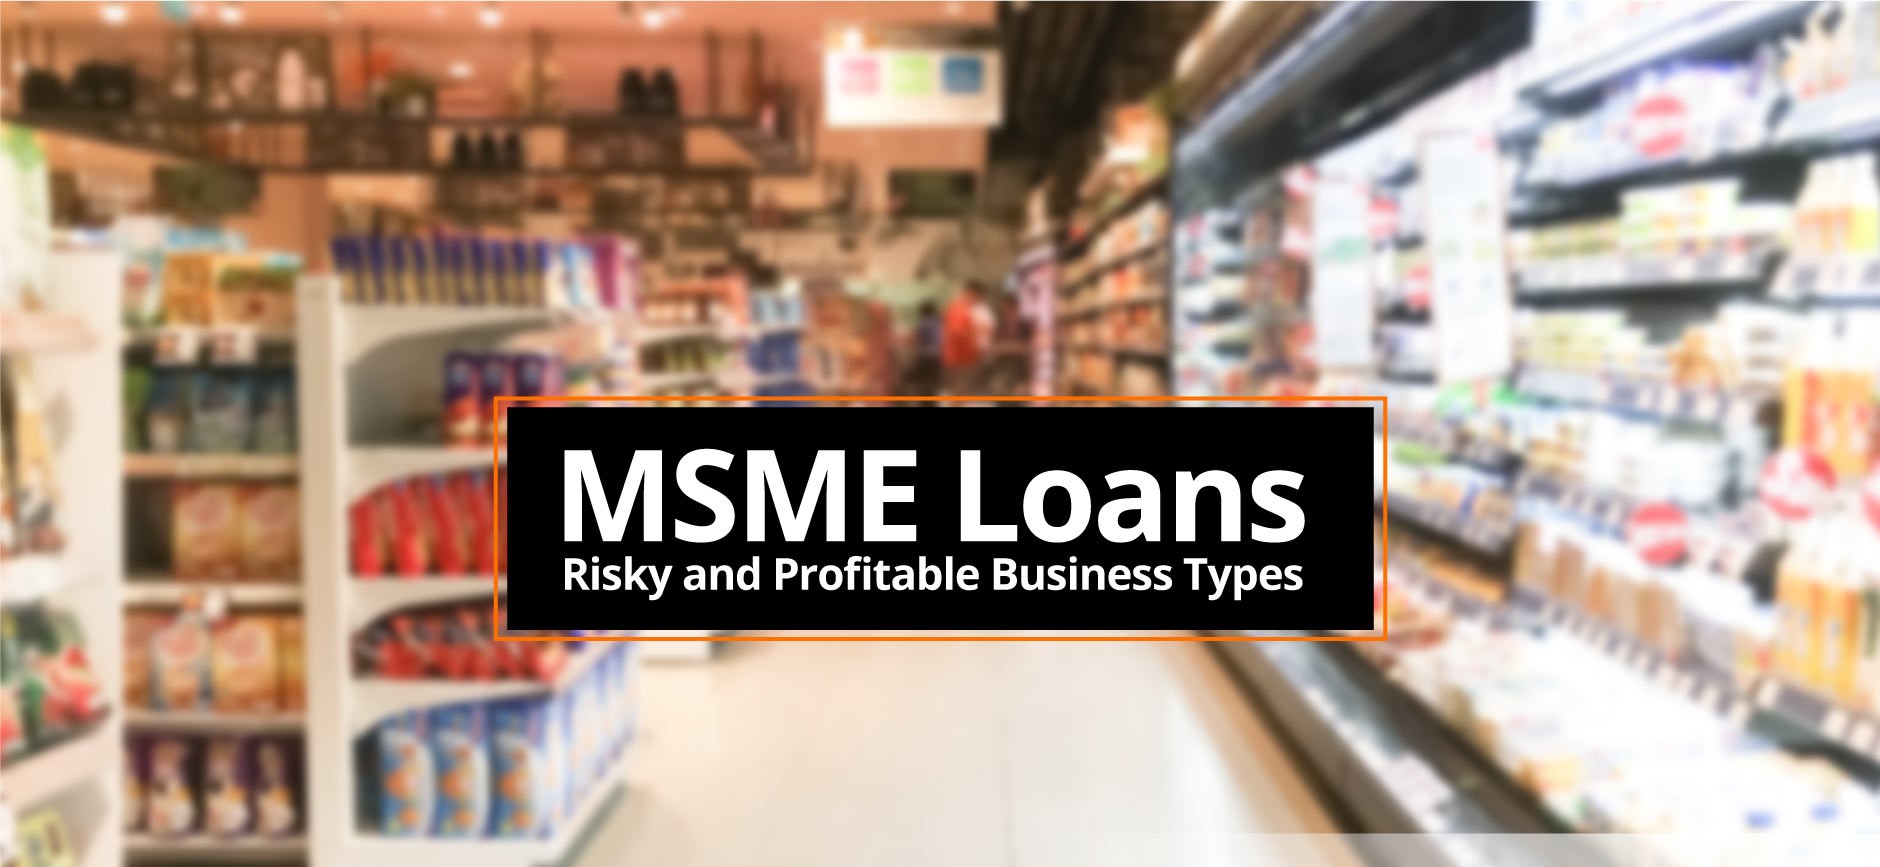 MSMEs may Apply for a Business Loan.